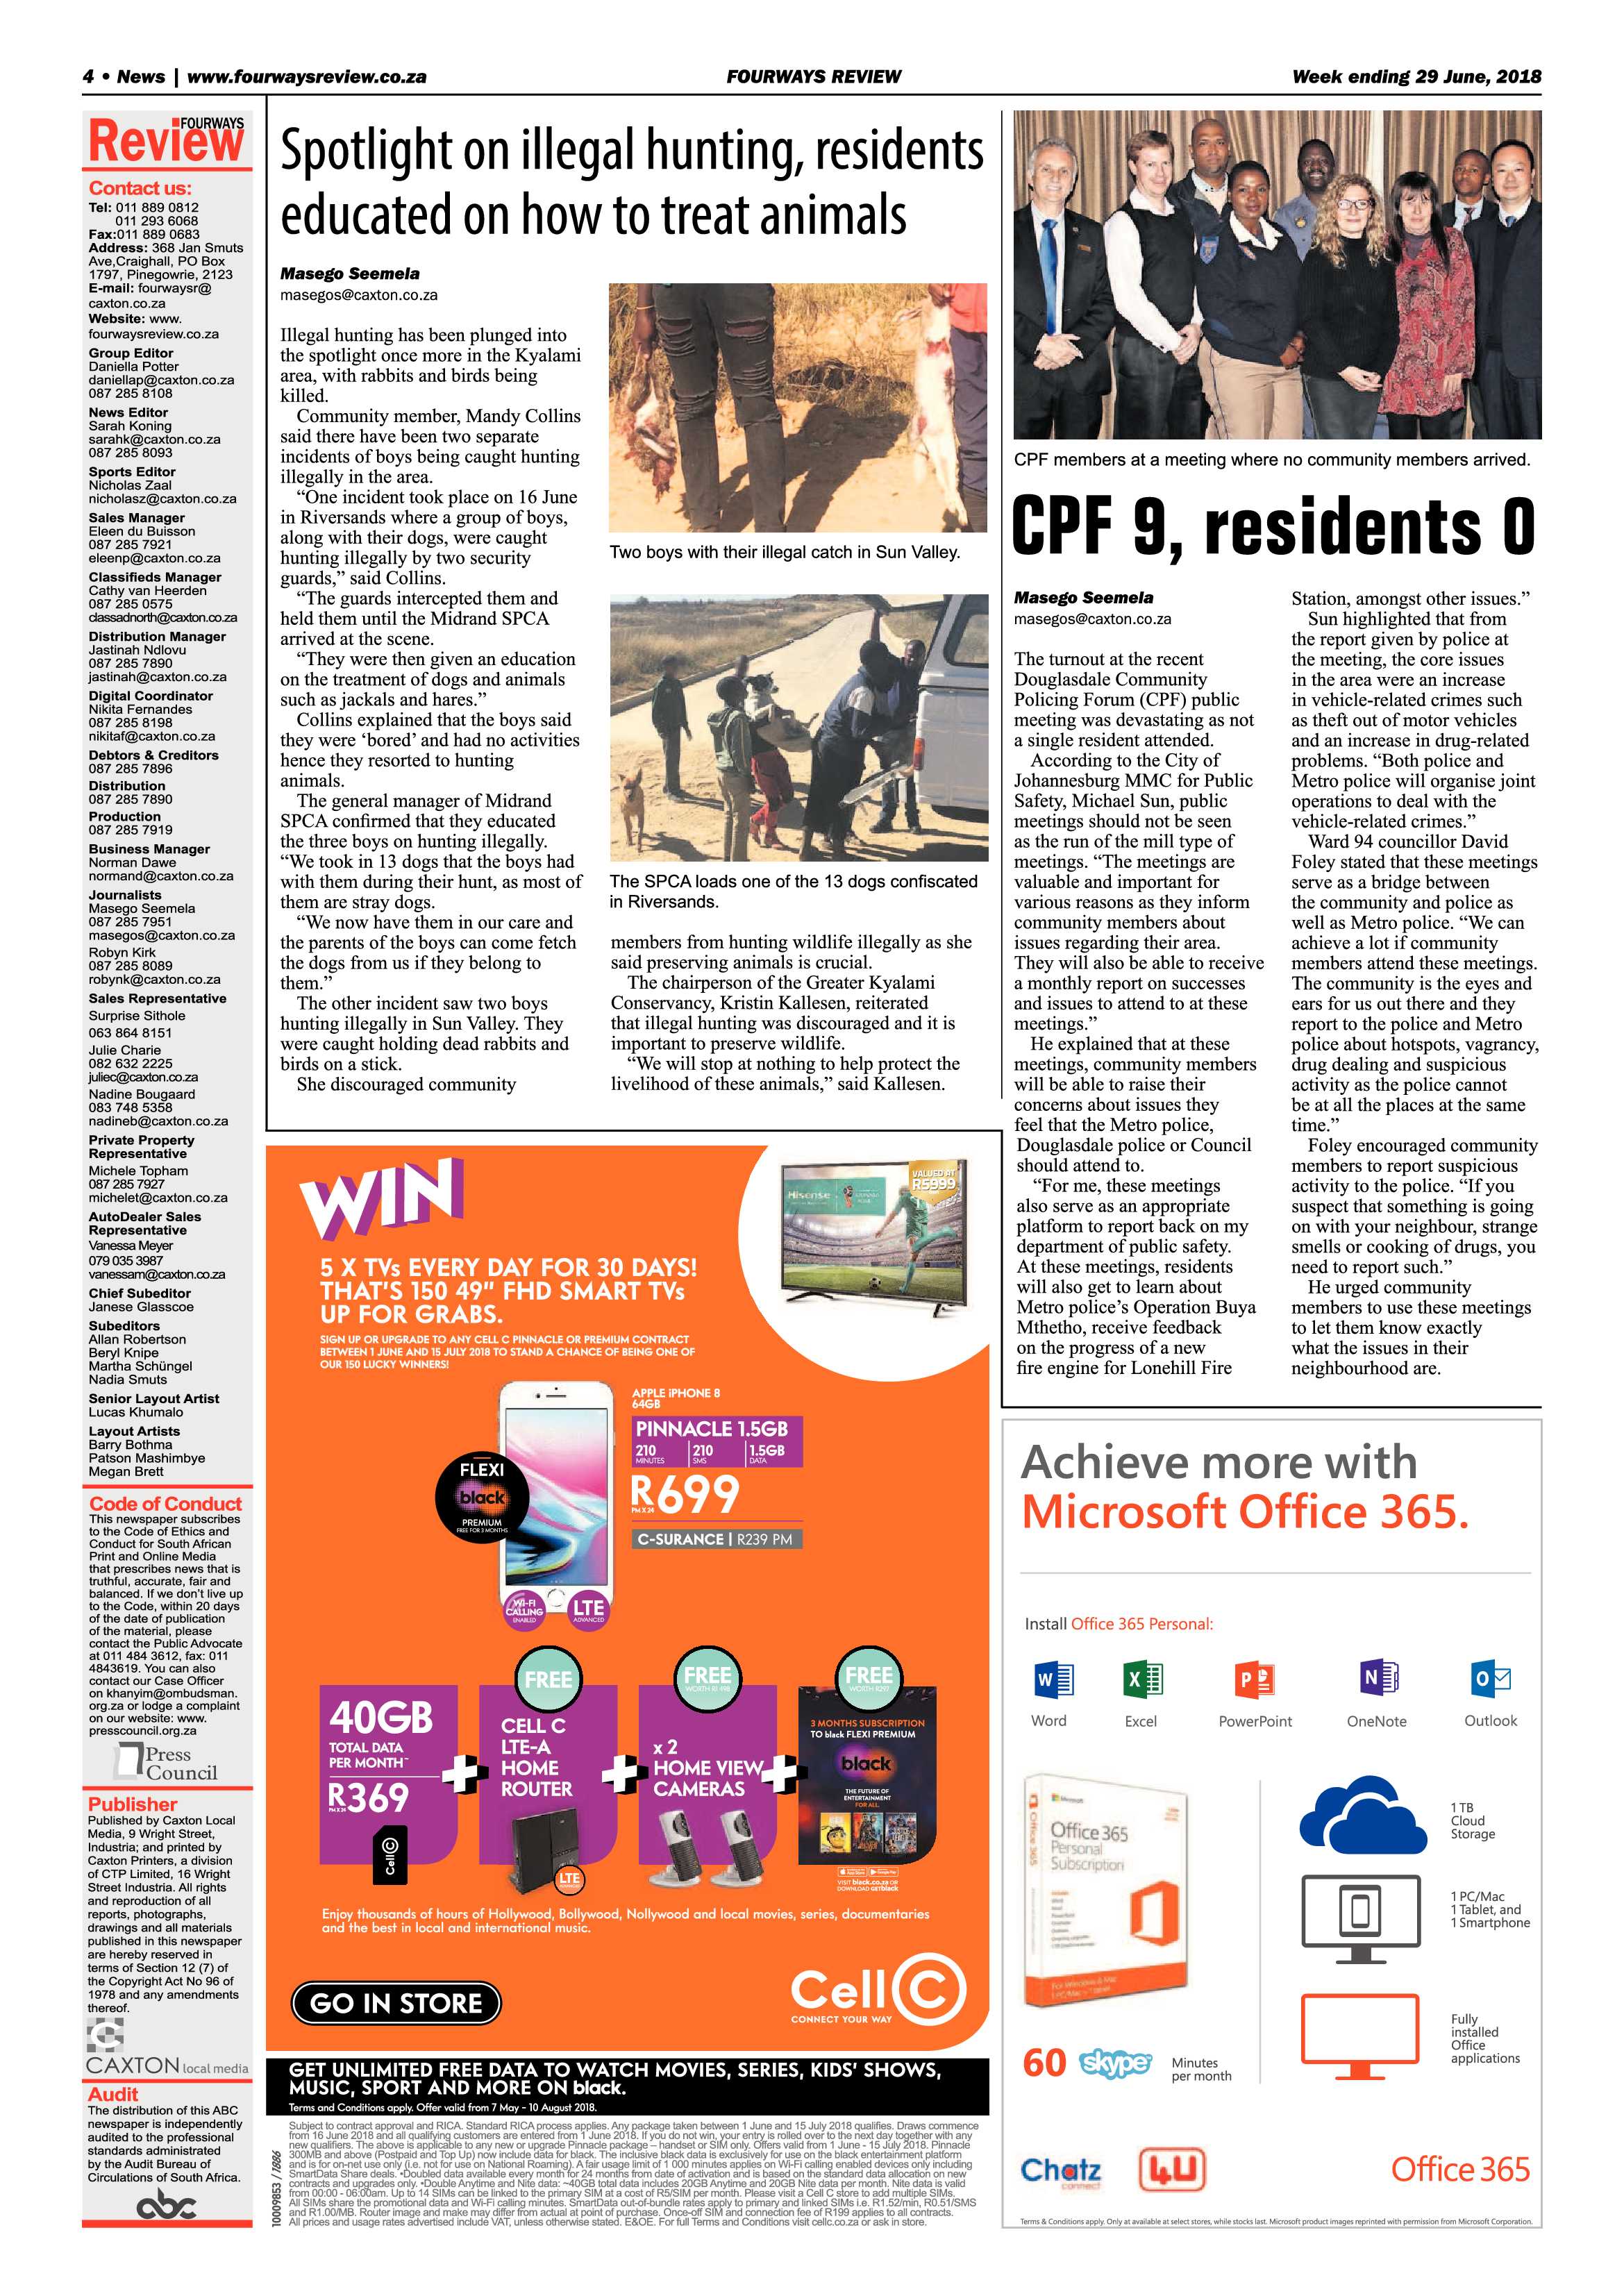 Fourways Review 29 June, 2018 page 4